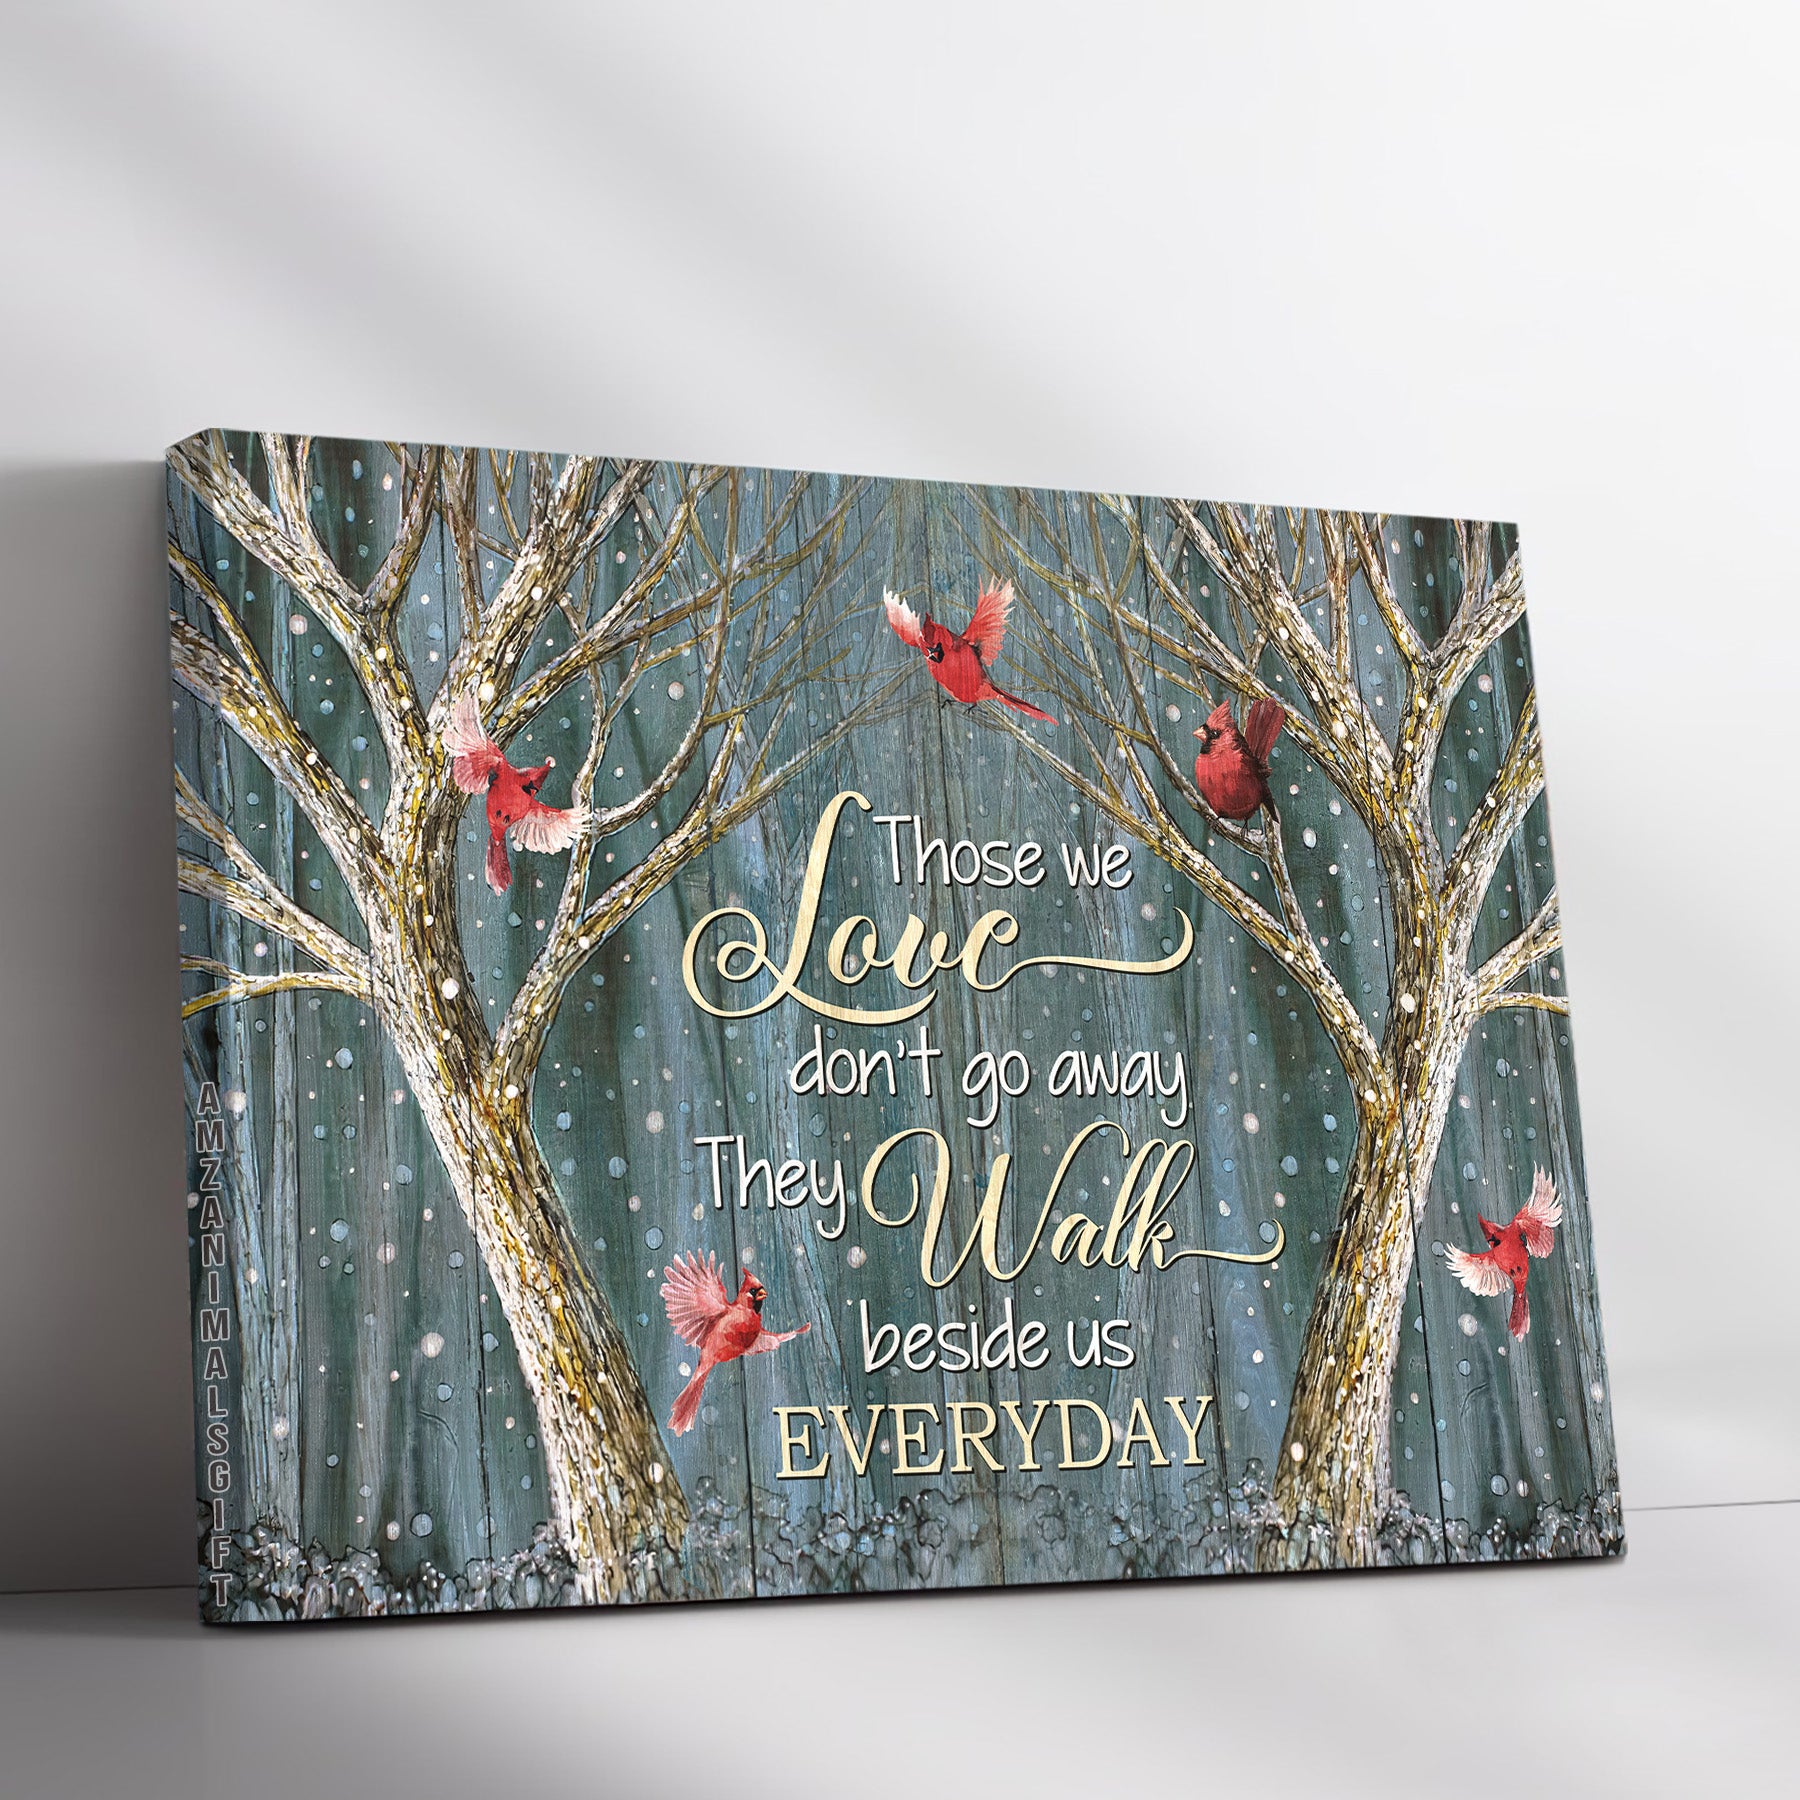 Memorial Premium Wrapped Landscape Canvas - Magic Forest, Winter Painting, Red Cardinal, Those We Love Don't Go Away - Heaven Gift For Members Family